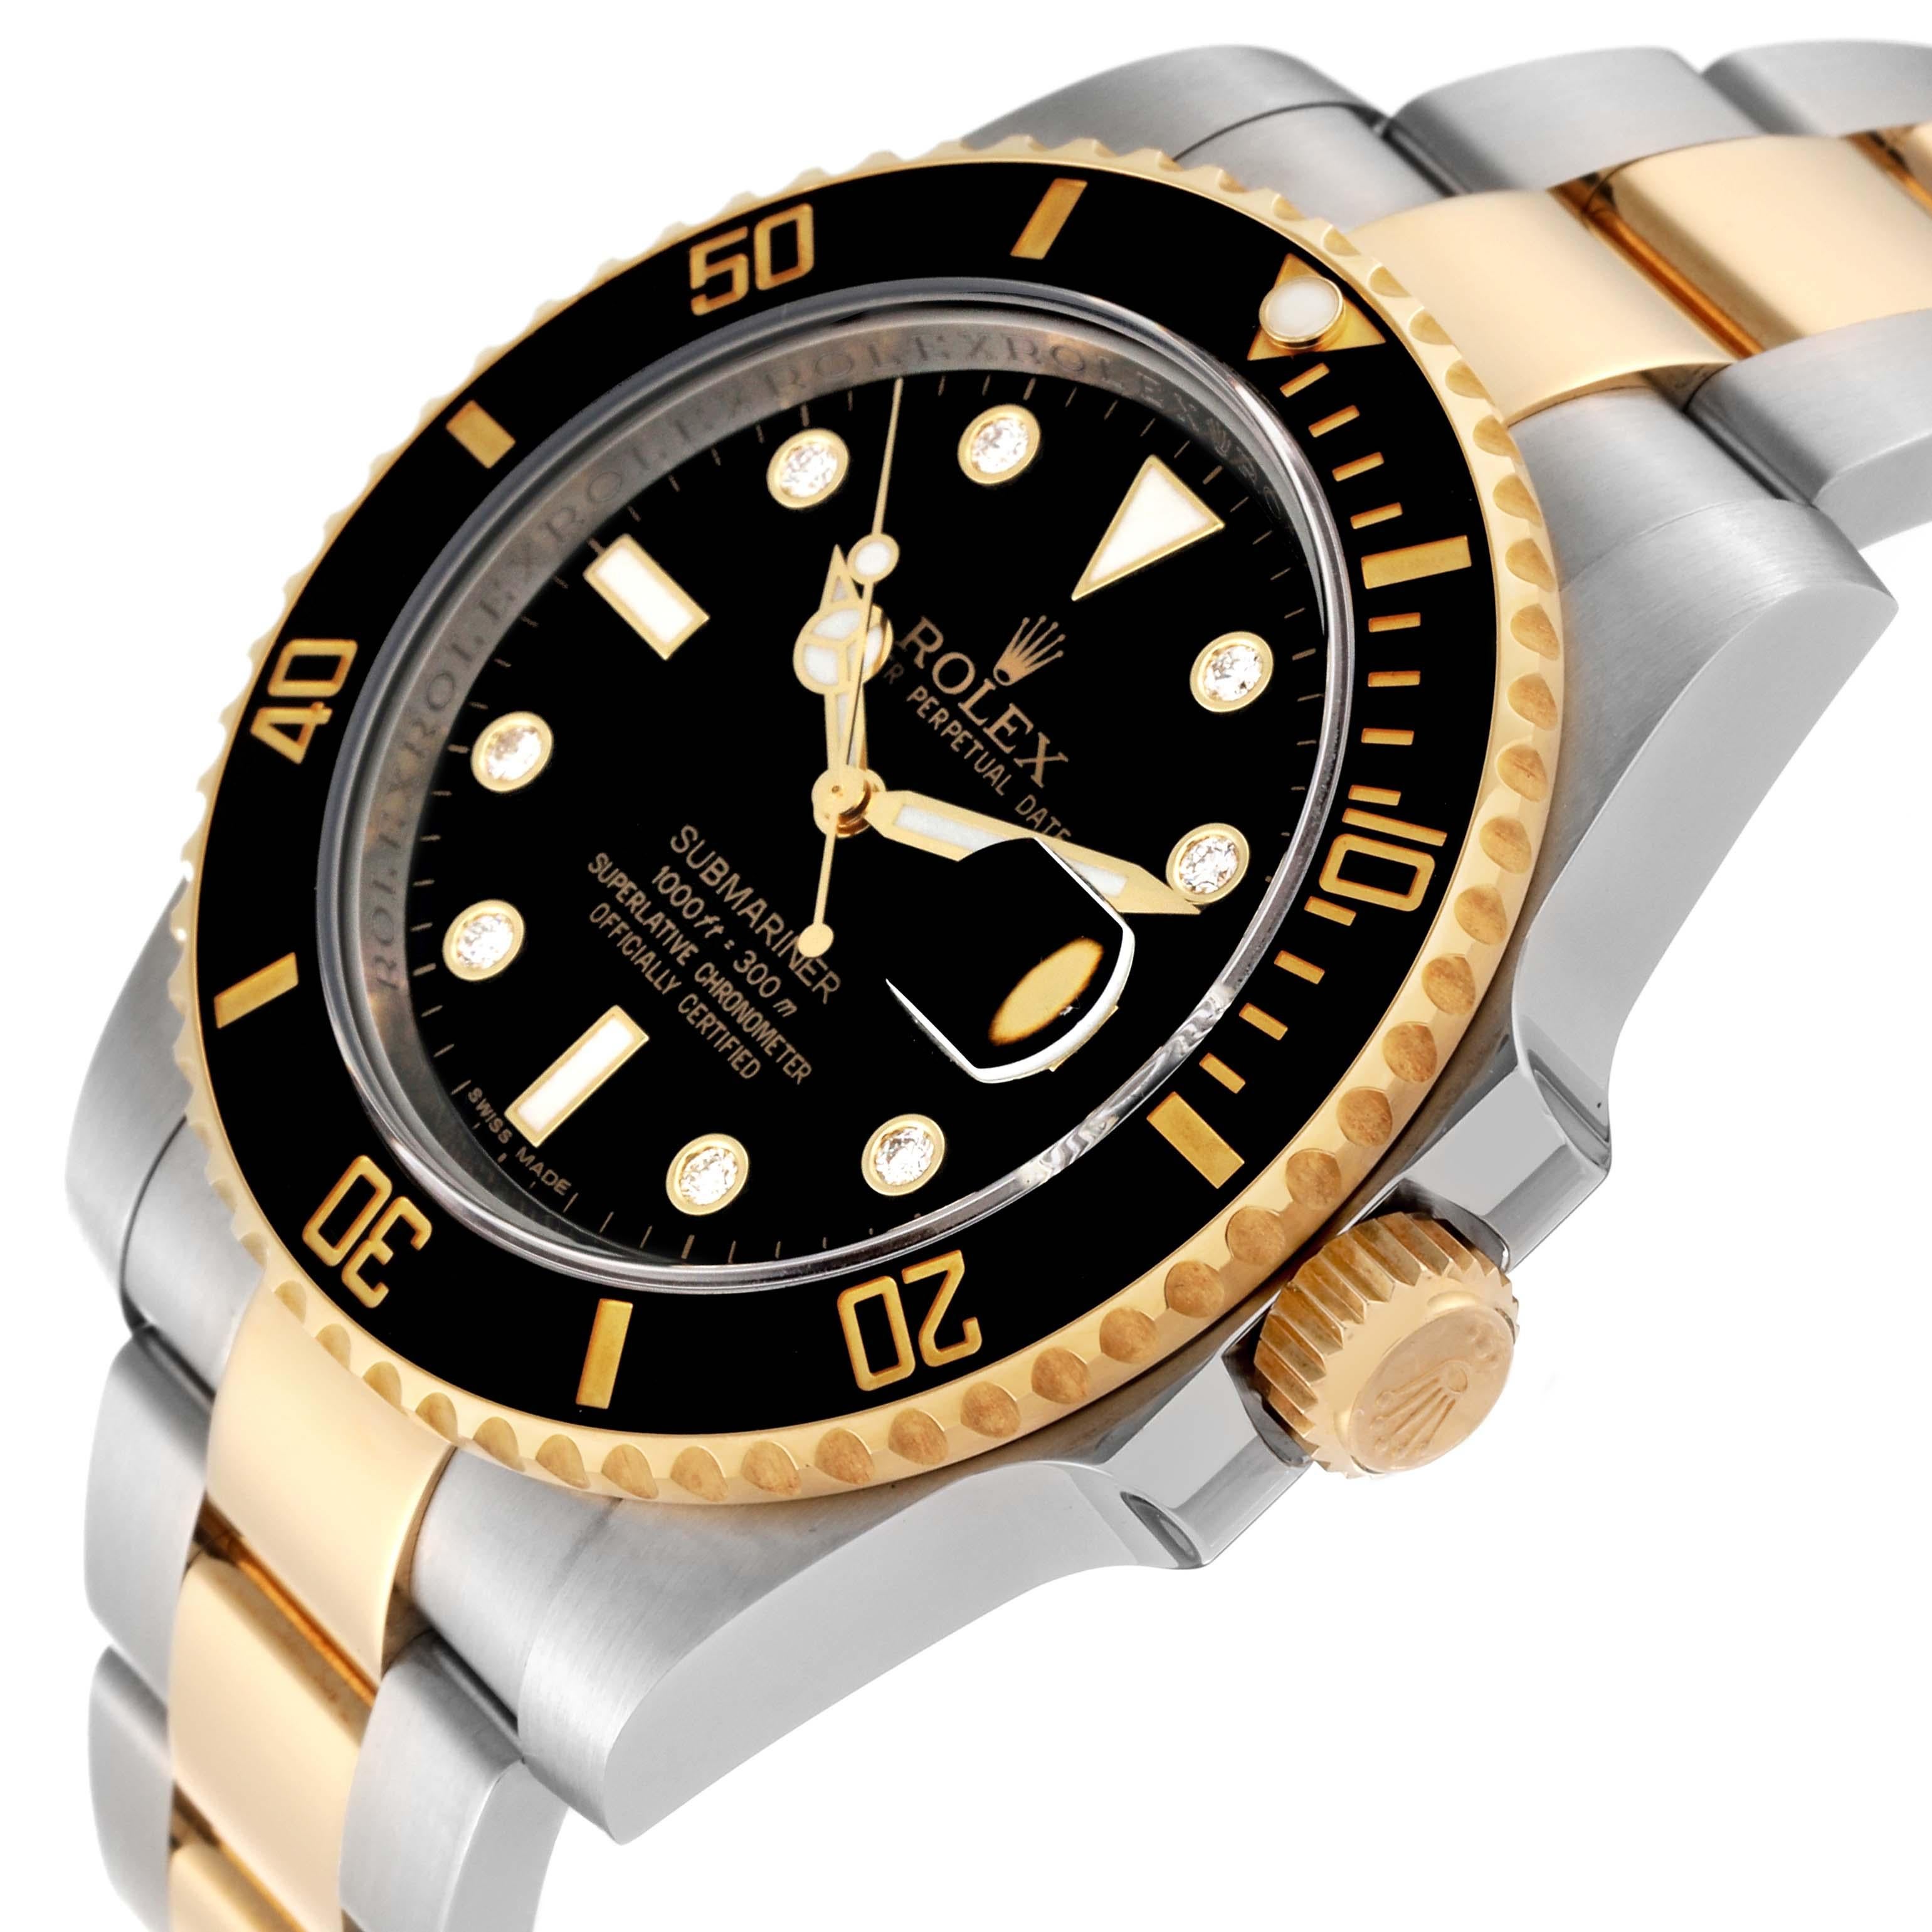 Rolex Submariner Steel Yellow Gold Black Diamond Dial Mens Watch 116613 For Sale 3